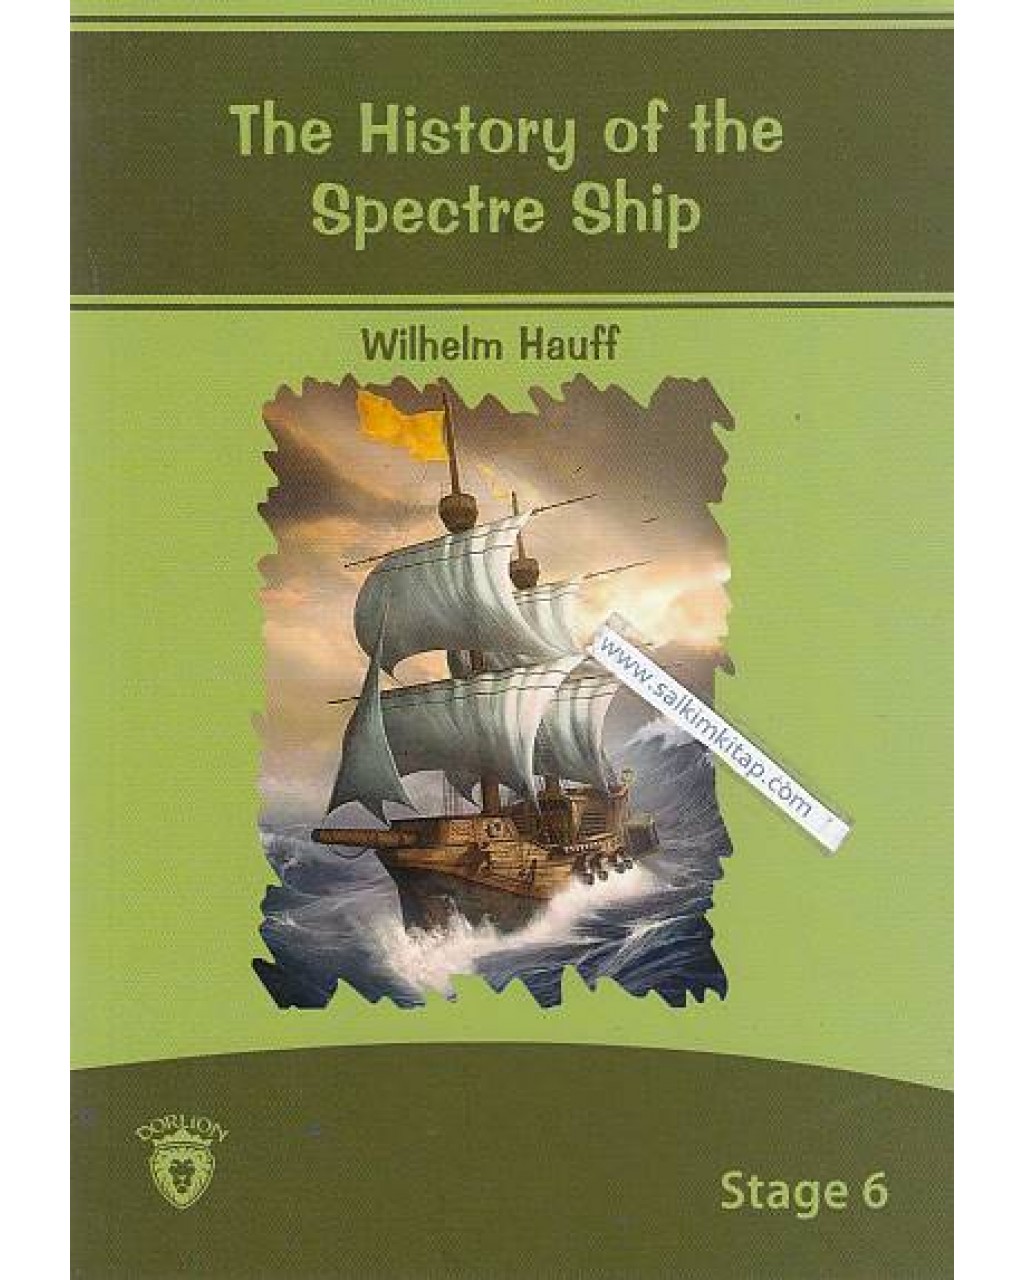 The History of the Spectre Ship